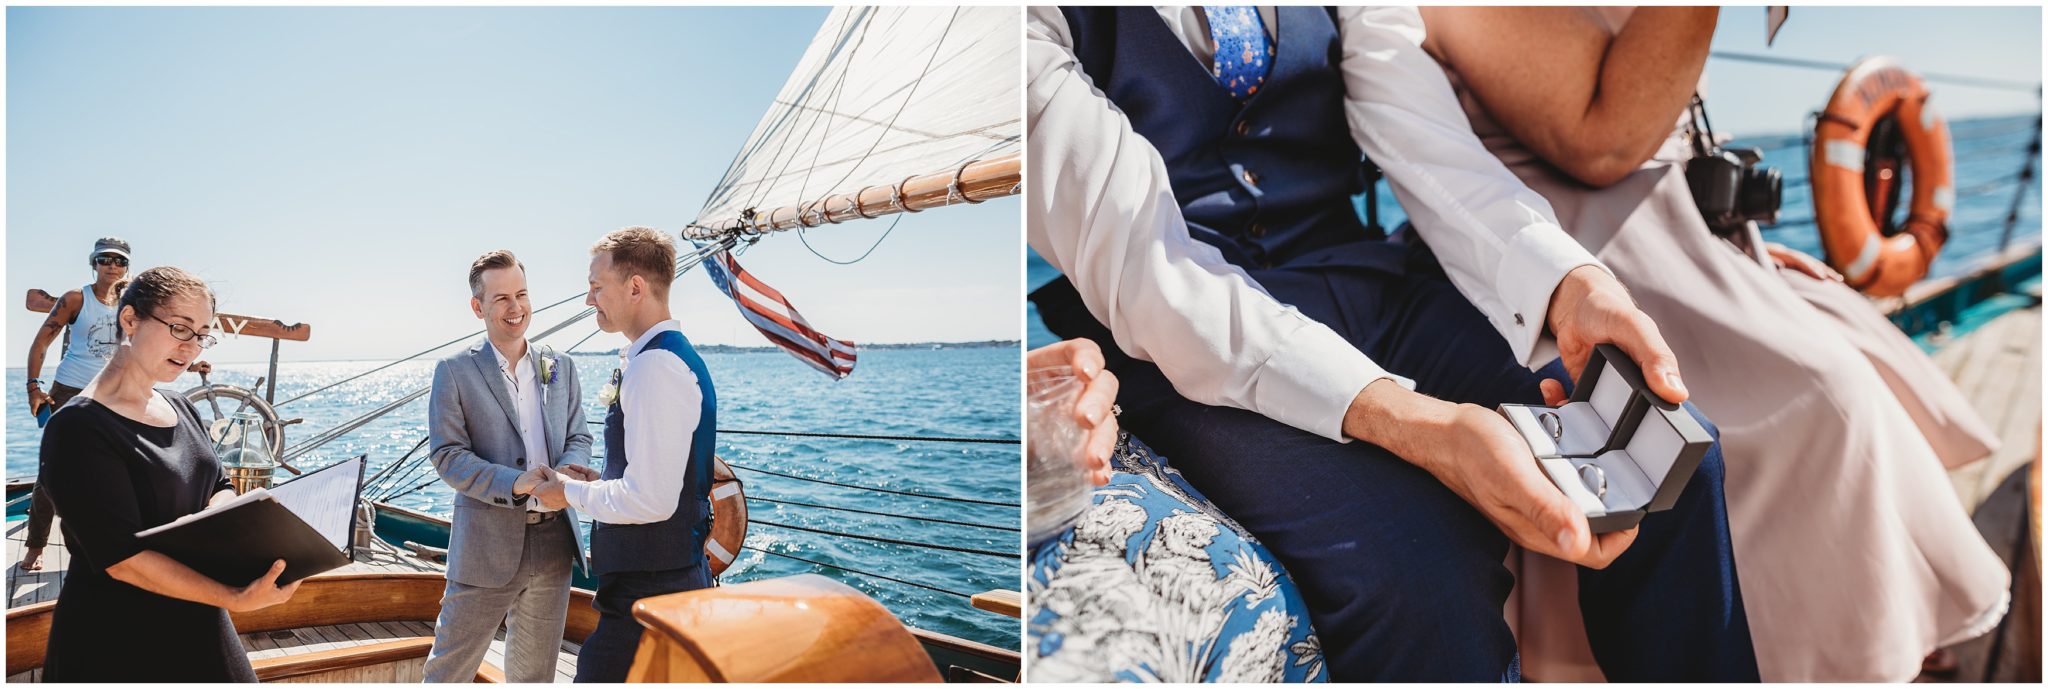 vows on a boat - new england destination wedding photographer